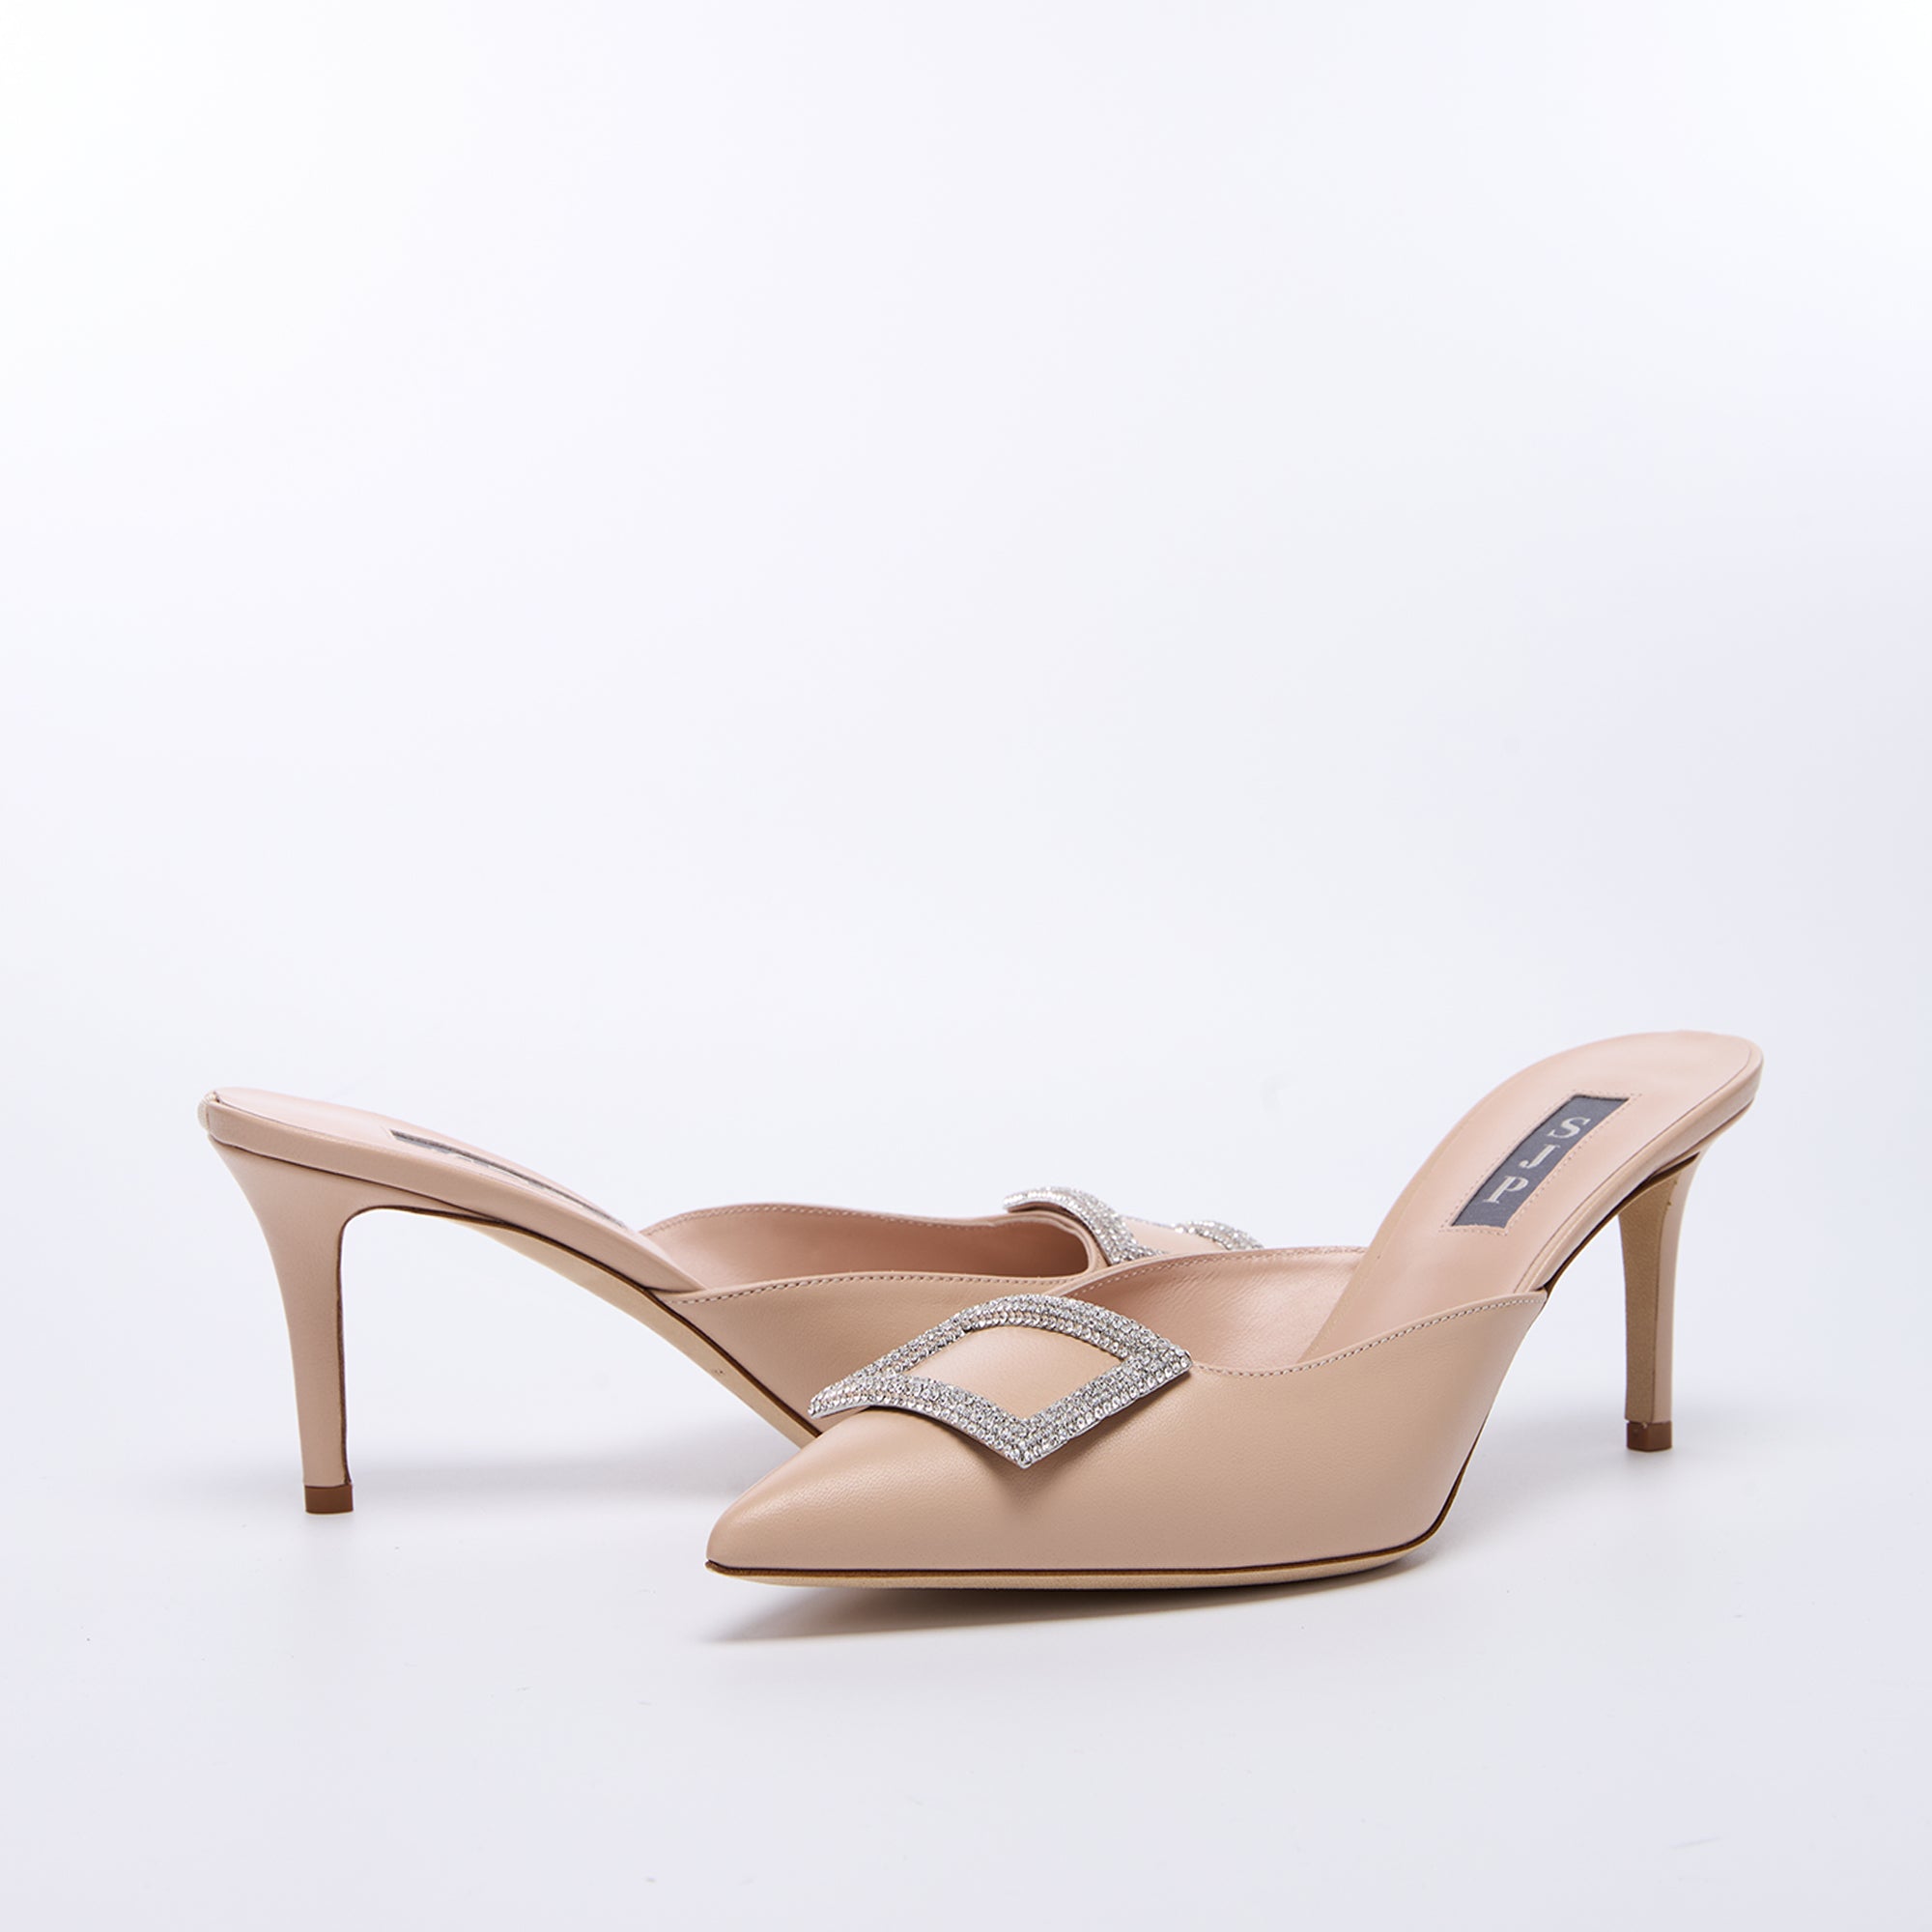 SJP by Sarah Jessica Parker Noble 70mm Beige Leather Mules